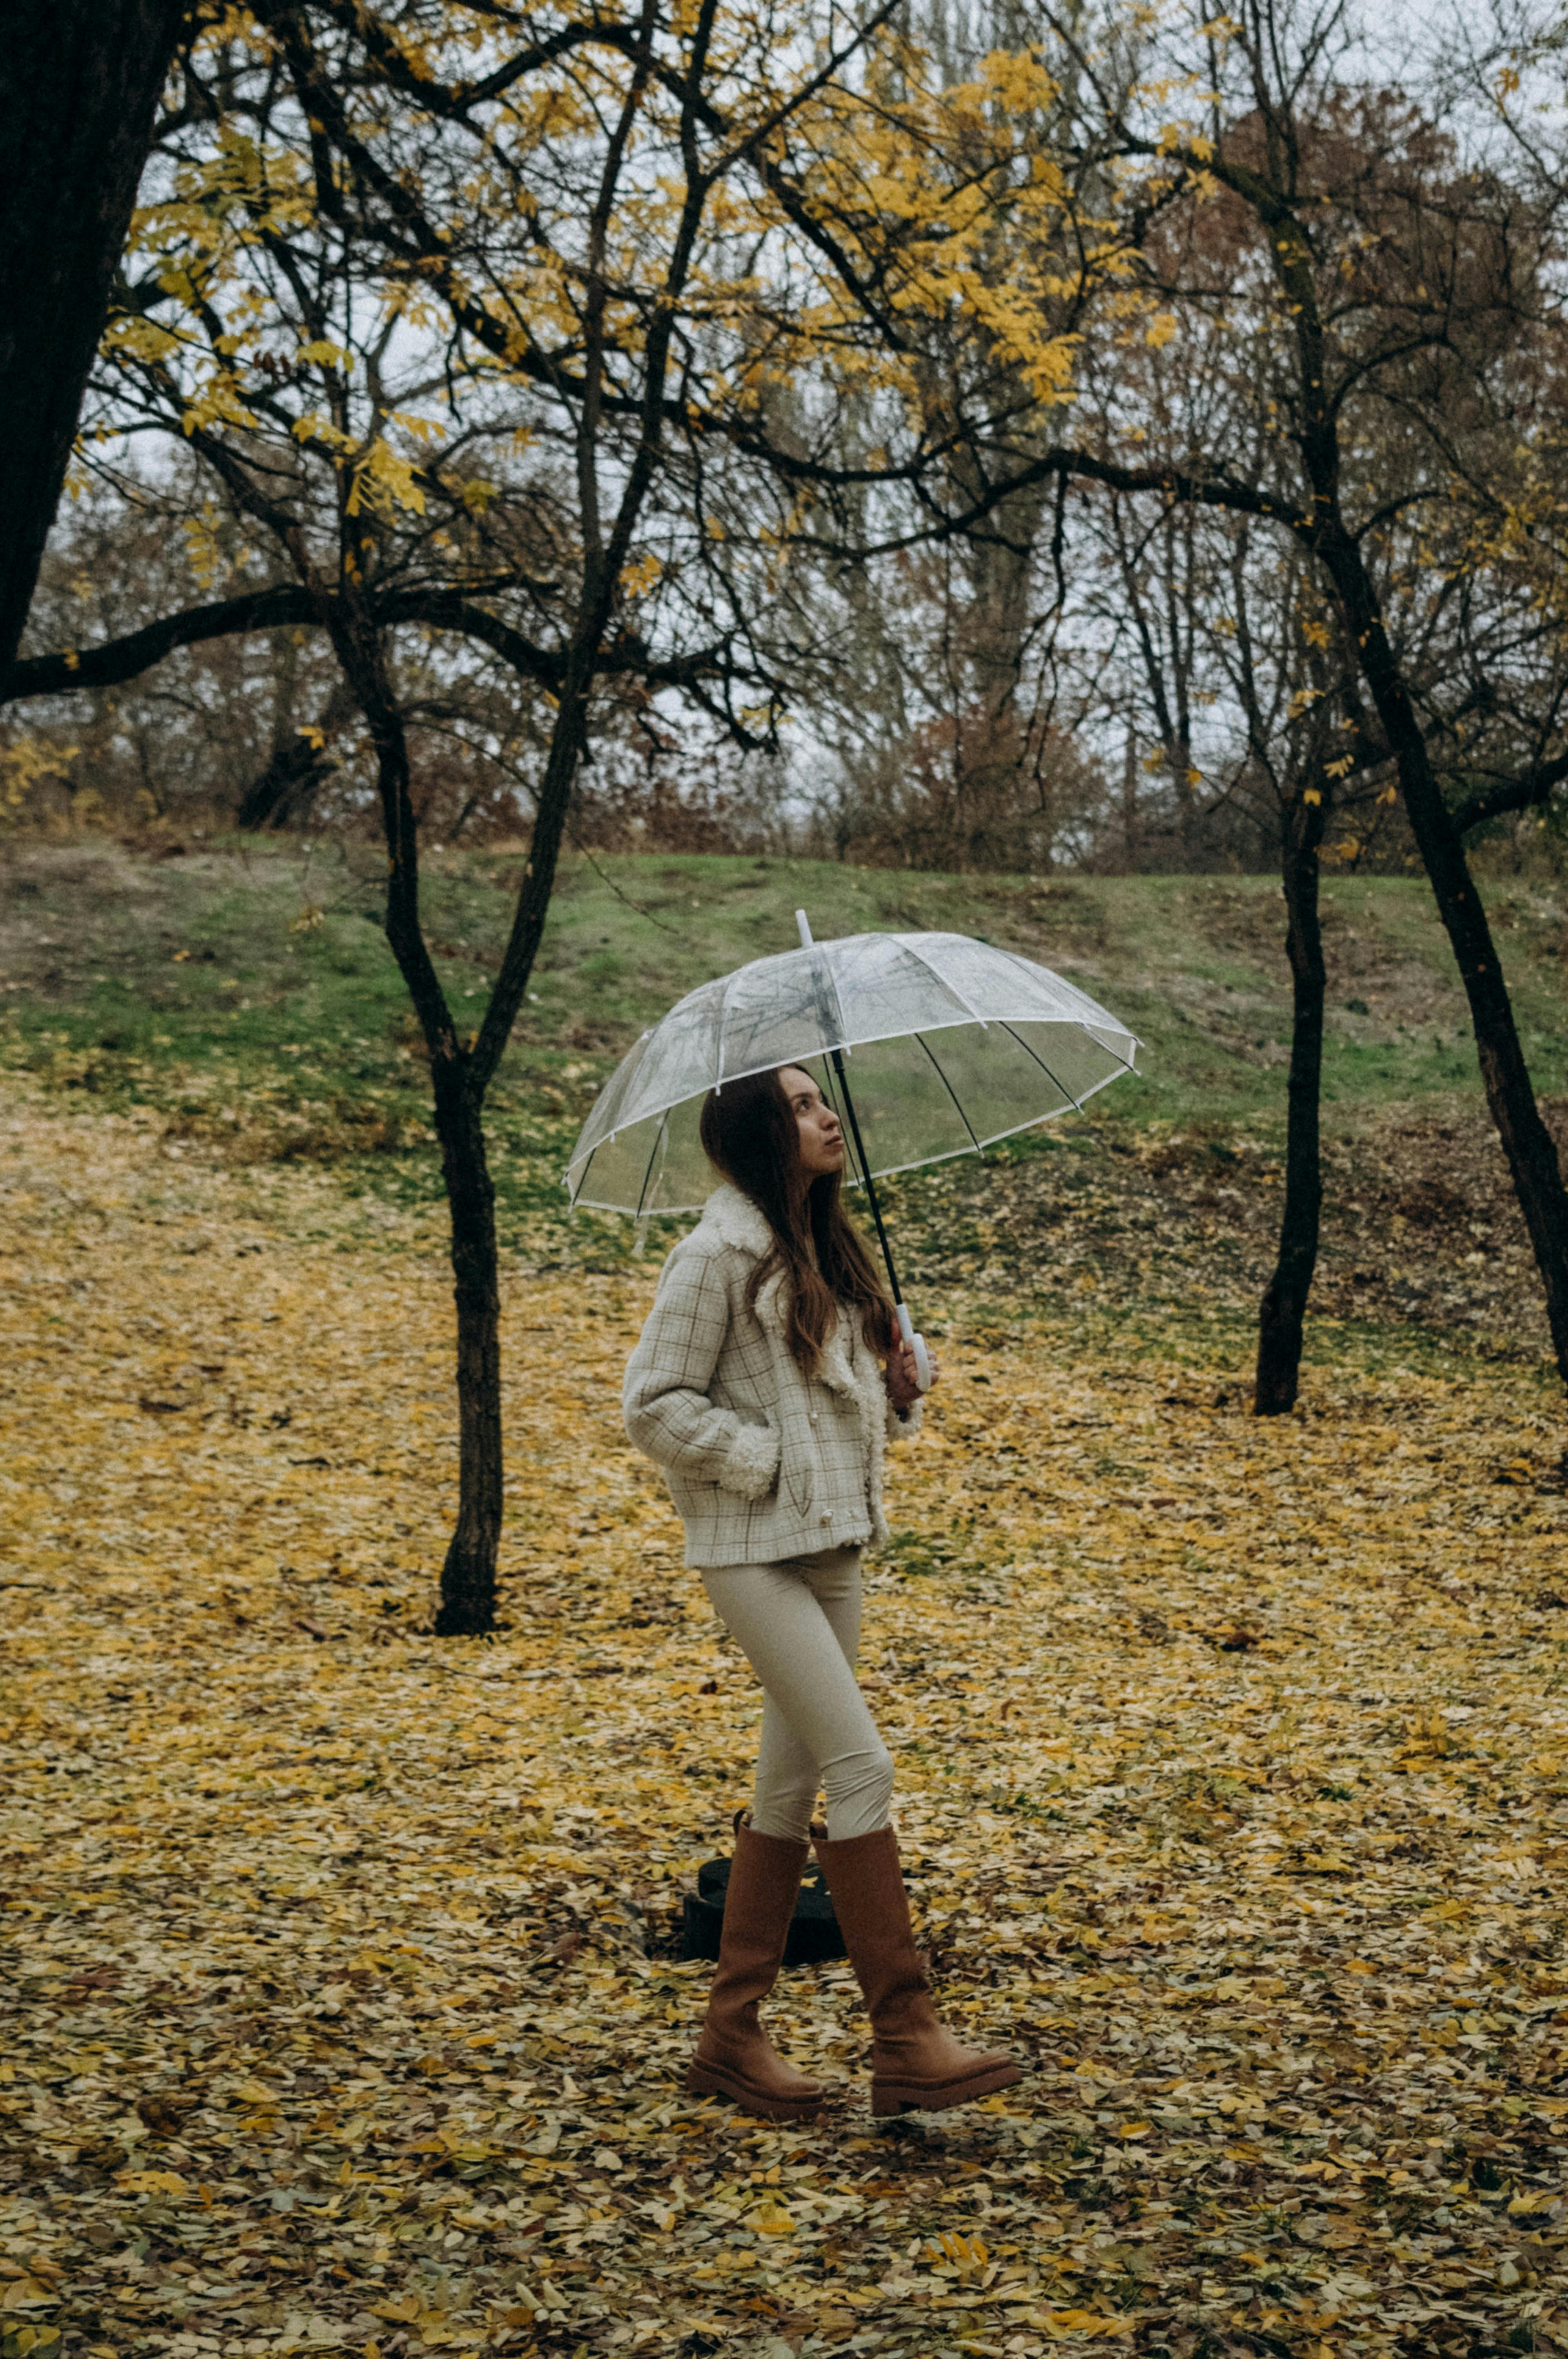 Woman in White Coat Holding Clear Umbrella Walking on Brown Grass